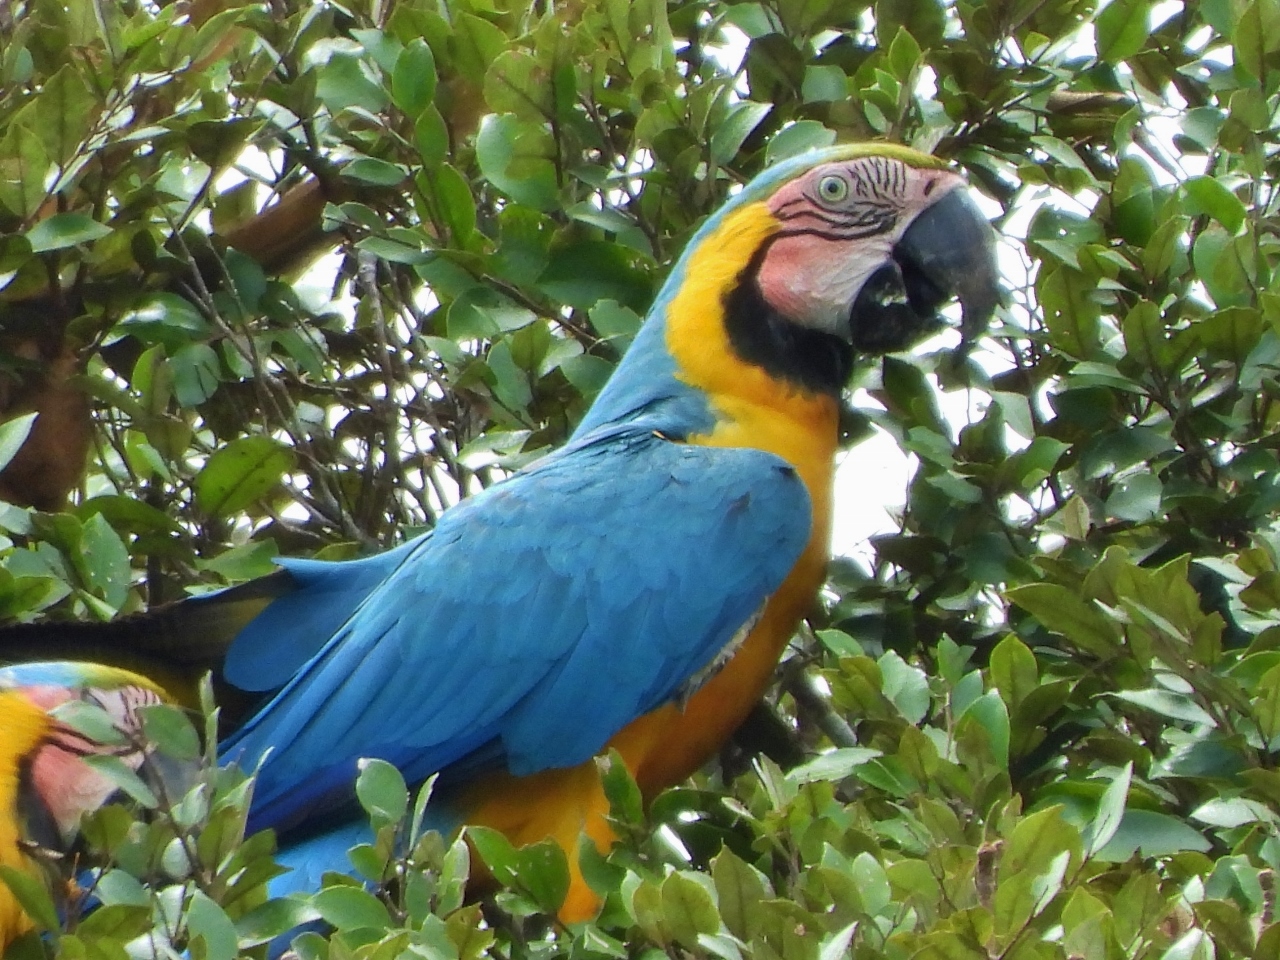 The blue and yellow macaw in Pacaya-Samiria National Reserve in the Peruvian Amazon. This is one of the largest macaws, reaching lengths of up to 34 inches (86cm) from head to tail.